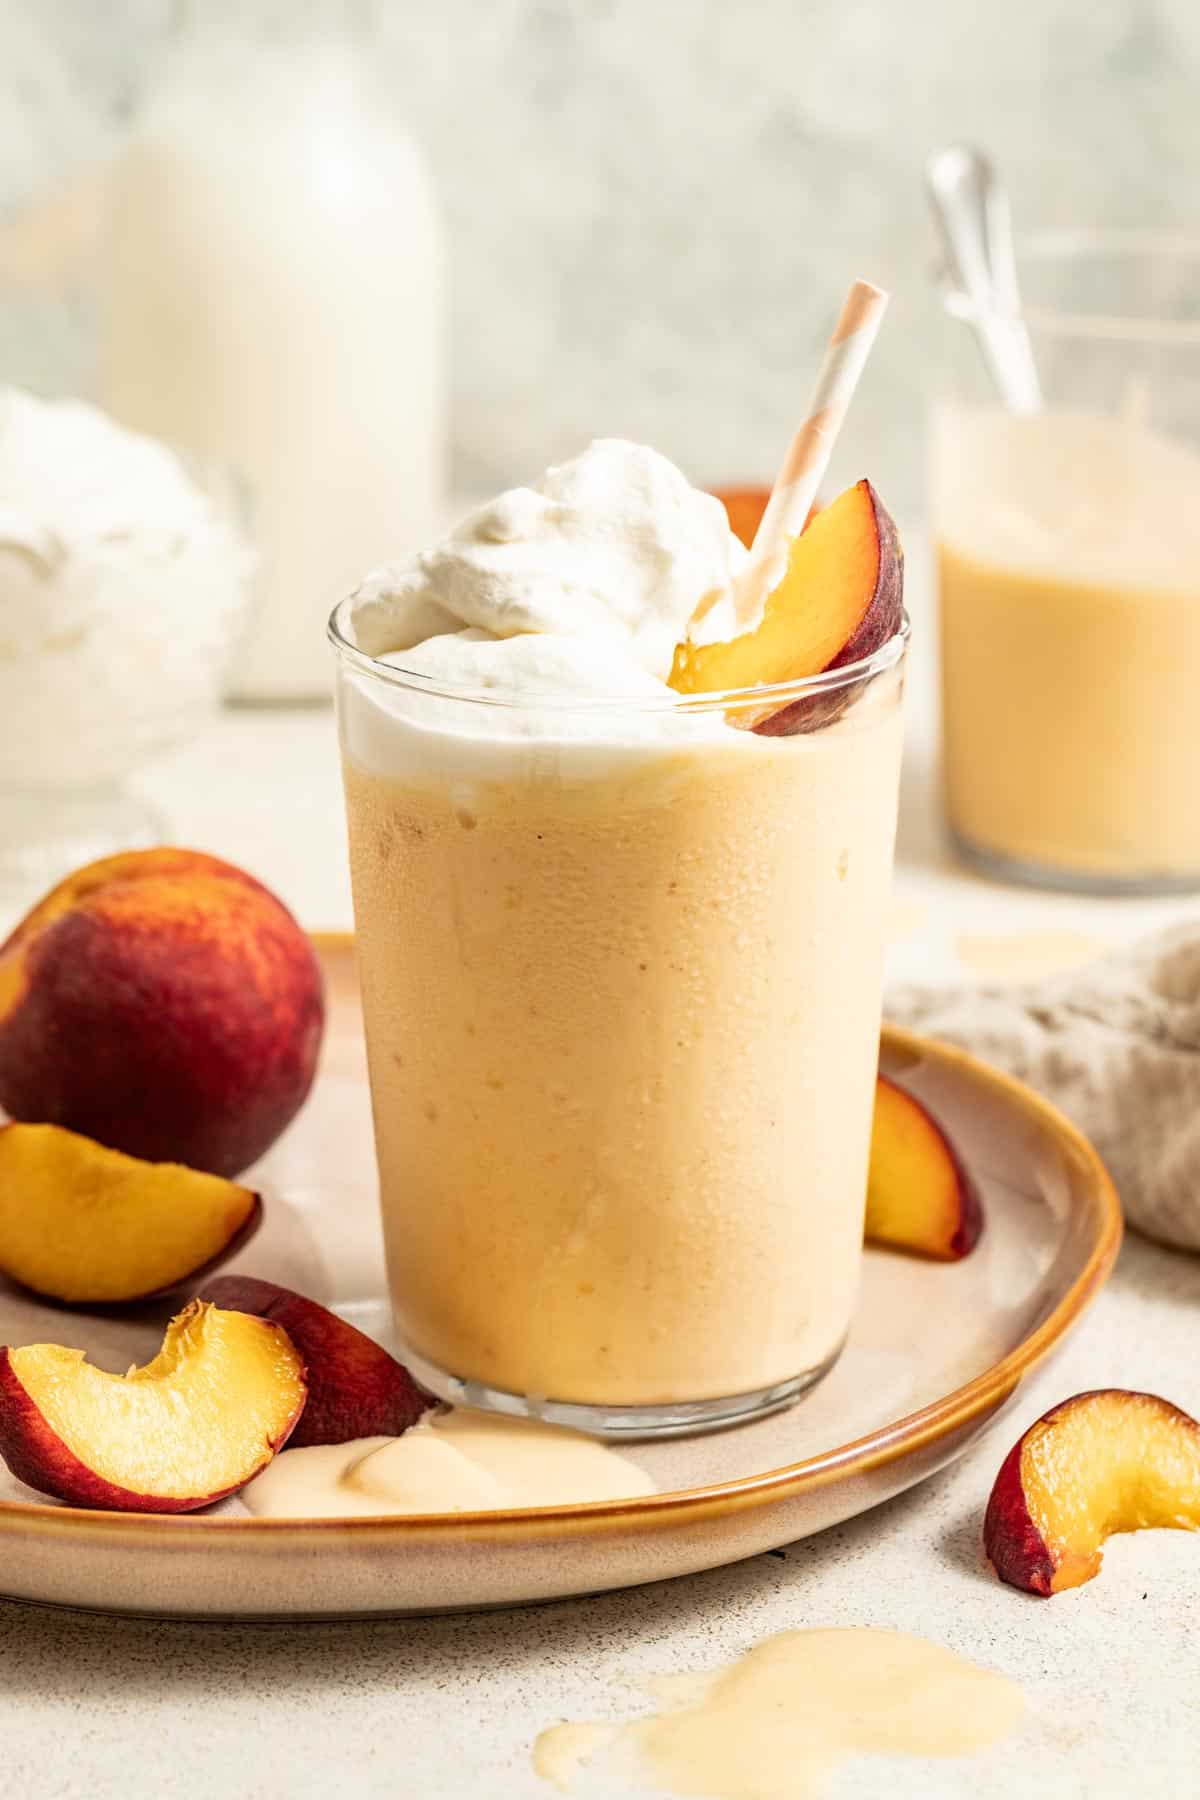 Peach milkshakes topped with fresh peach slices and a striped straw on a table with a glass of milk and vanilla ice cream.